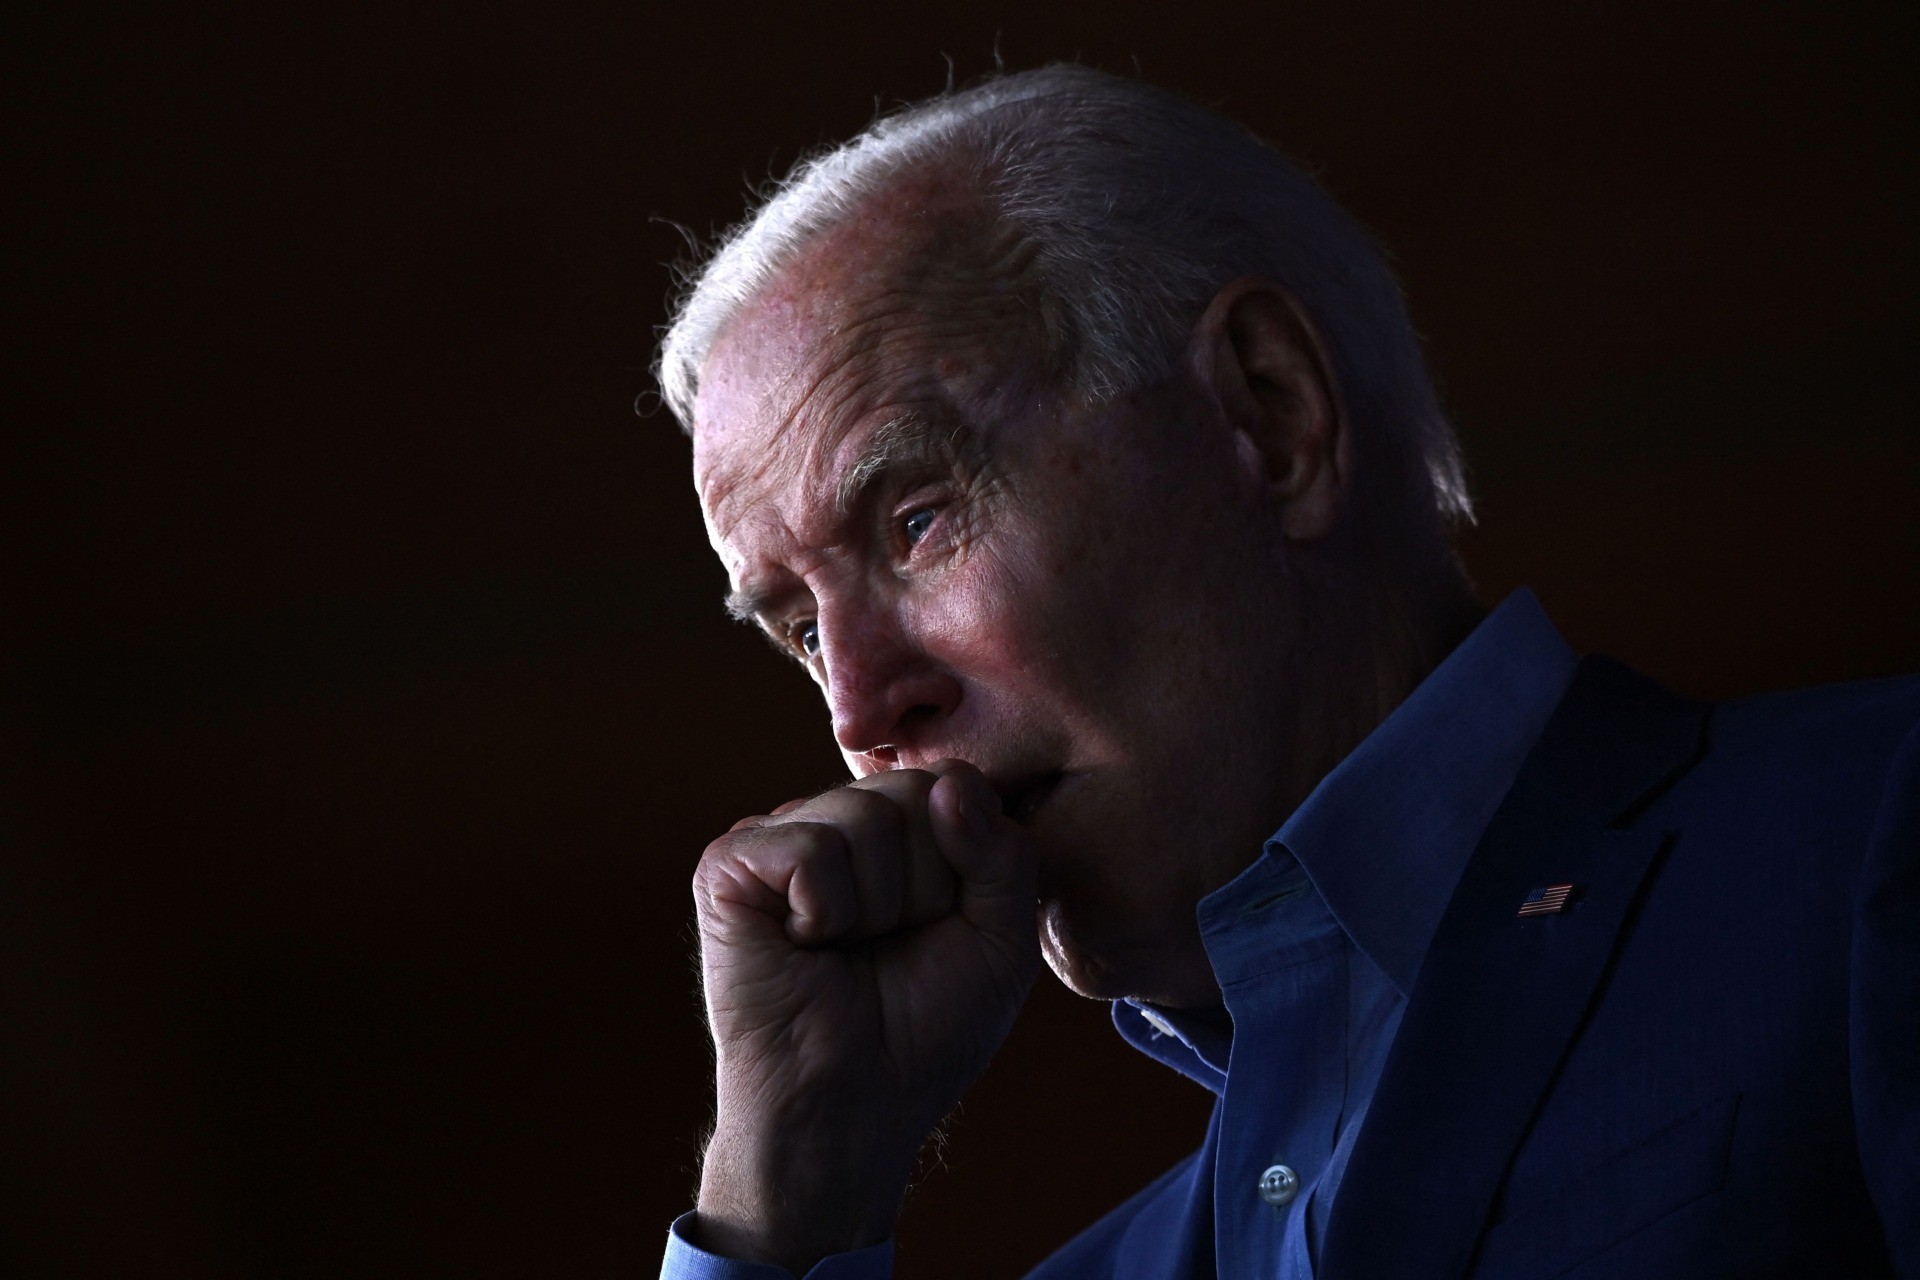 US President Joe Biden clears his throat as he speaks during a campaign event for Virginia gubernatorial candidate Terry McAuliffe at Lubber Run Park, Arlington, Virginia on July 23, 2021. (Photo by Brendan SMIALOWSKI / AFP) (Photo by BRENDAN SMIALOWSKI/AFP via Getty Images)